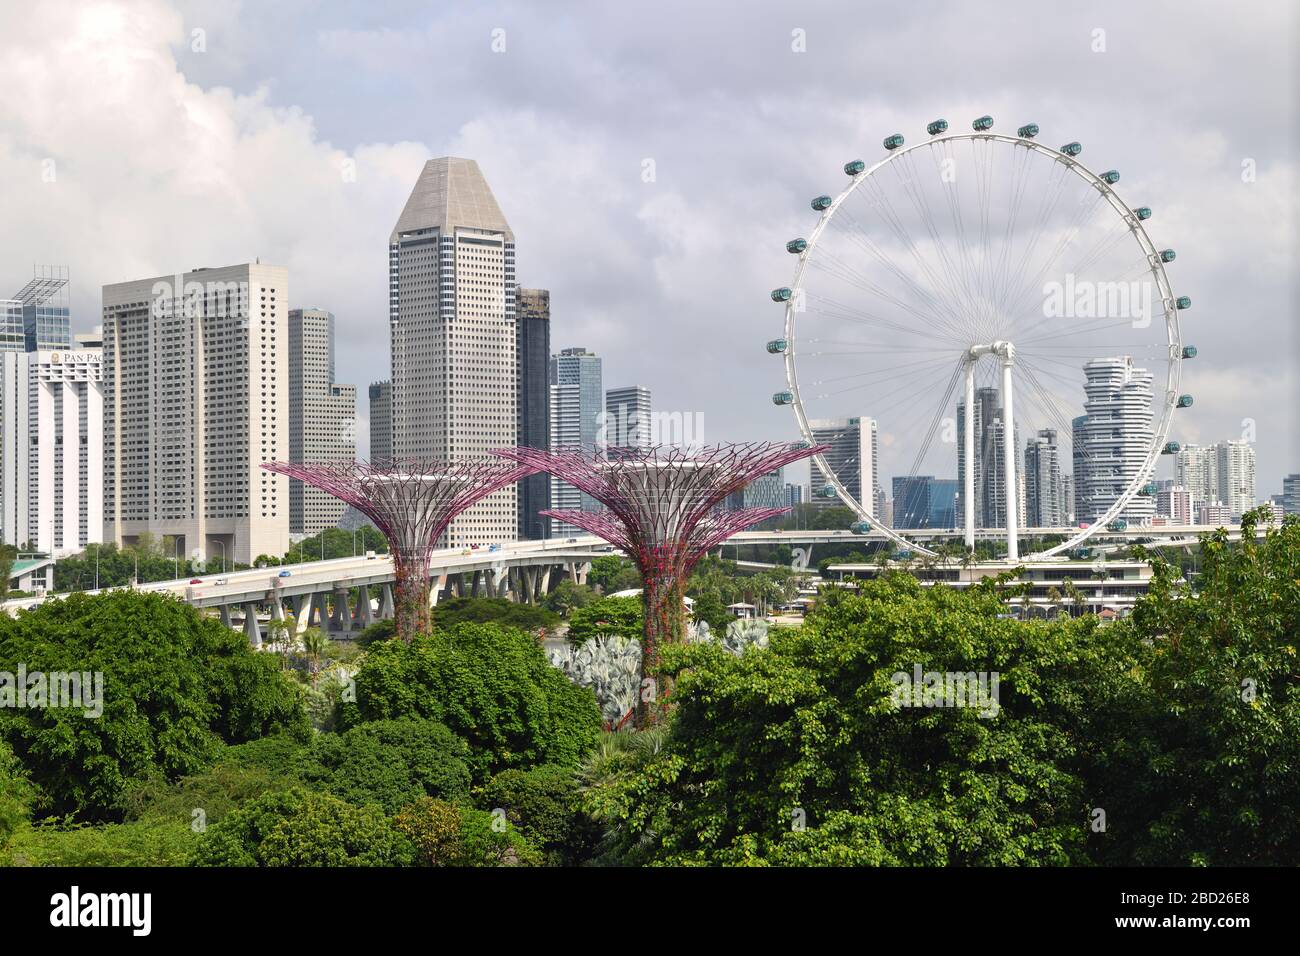 The Singapore Flyer Ferris wheel dominates the landscape at Gardens by the Bay with the city towers providing the backdrop. Stock Photo